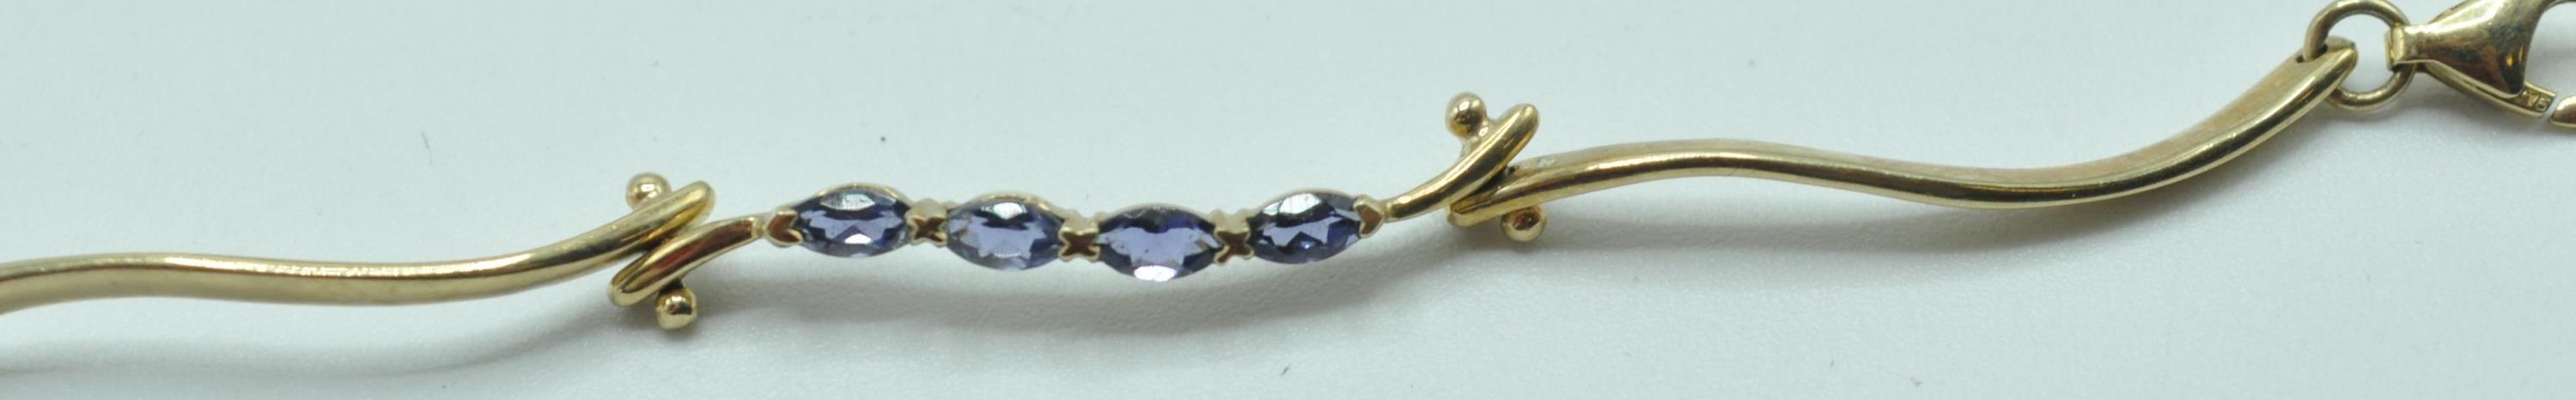 9CT GOLD AND BLUE STONE SPACER BRACELET - Image 6 of 6